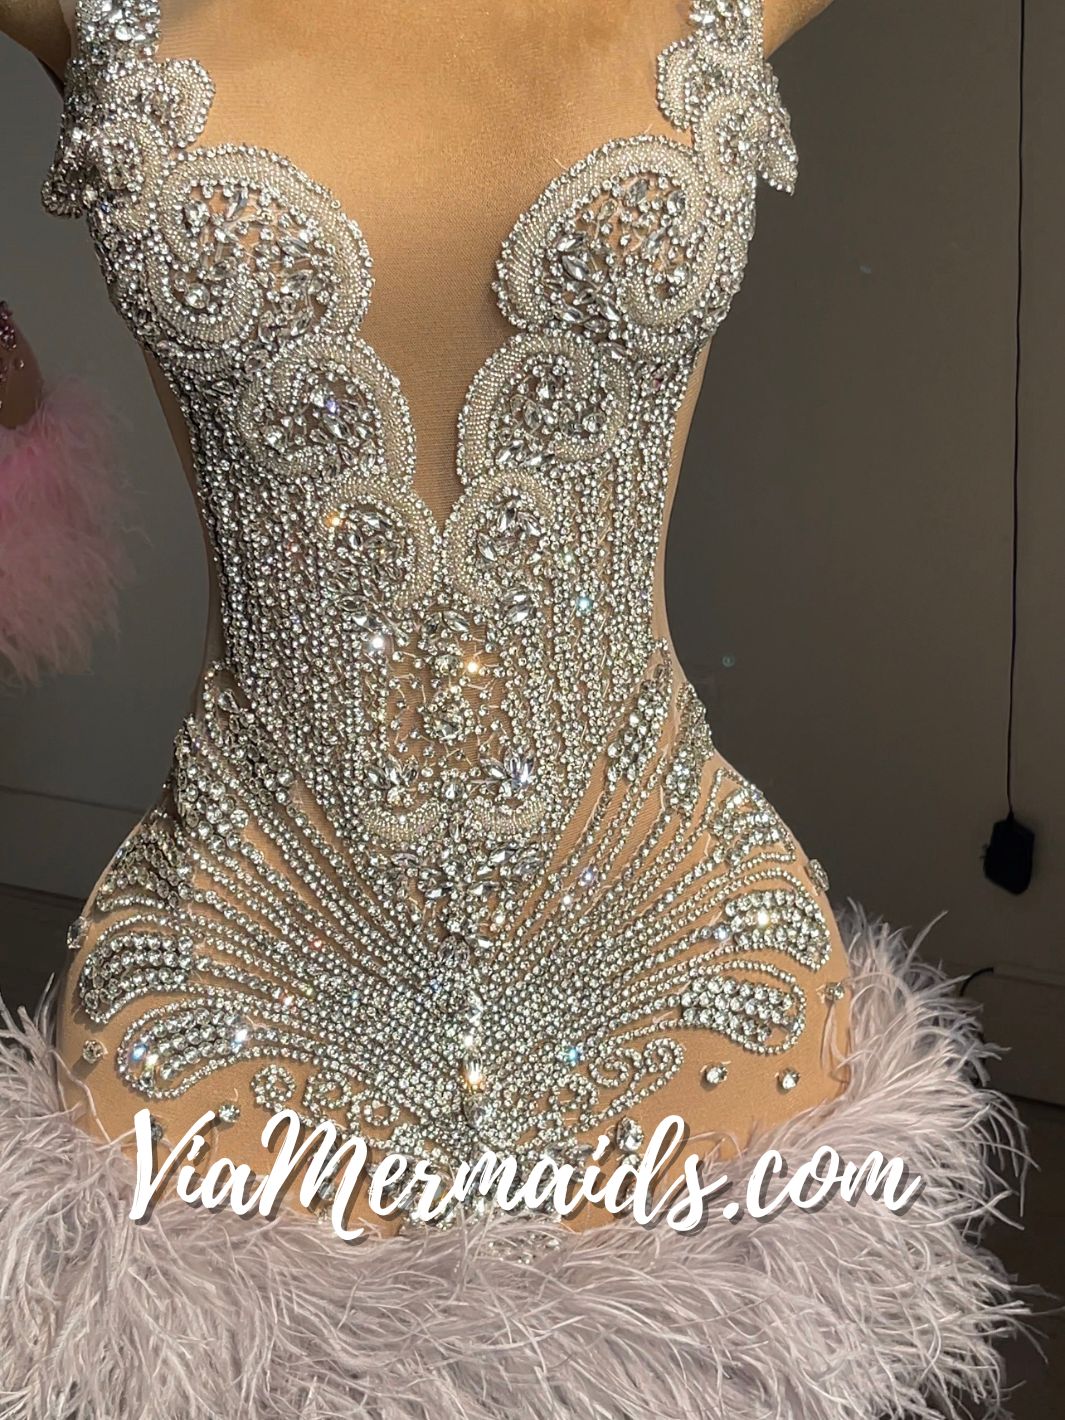 The Girl They LOVE TO HATE Custom Silver Rhinestone Dress with Feathers